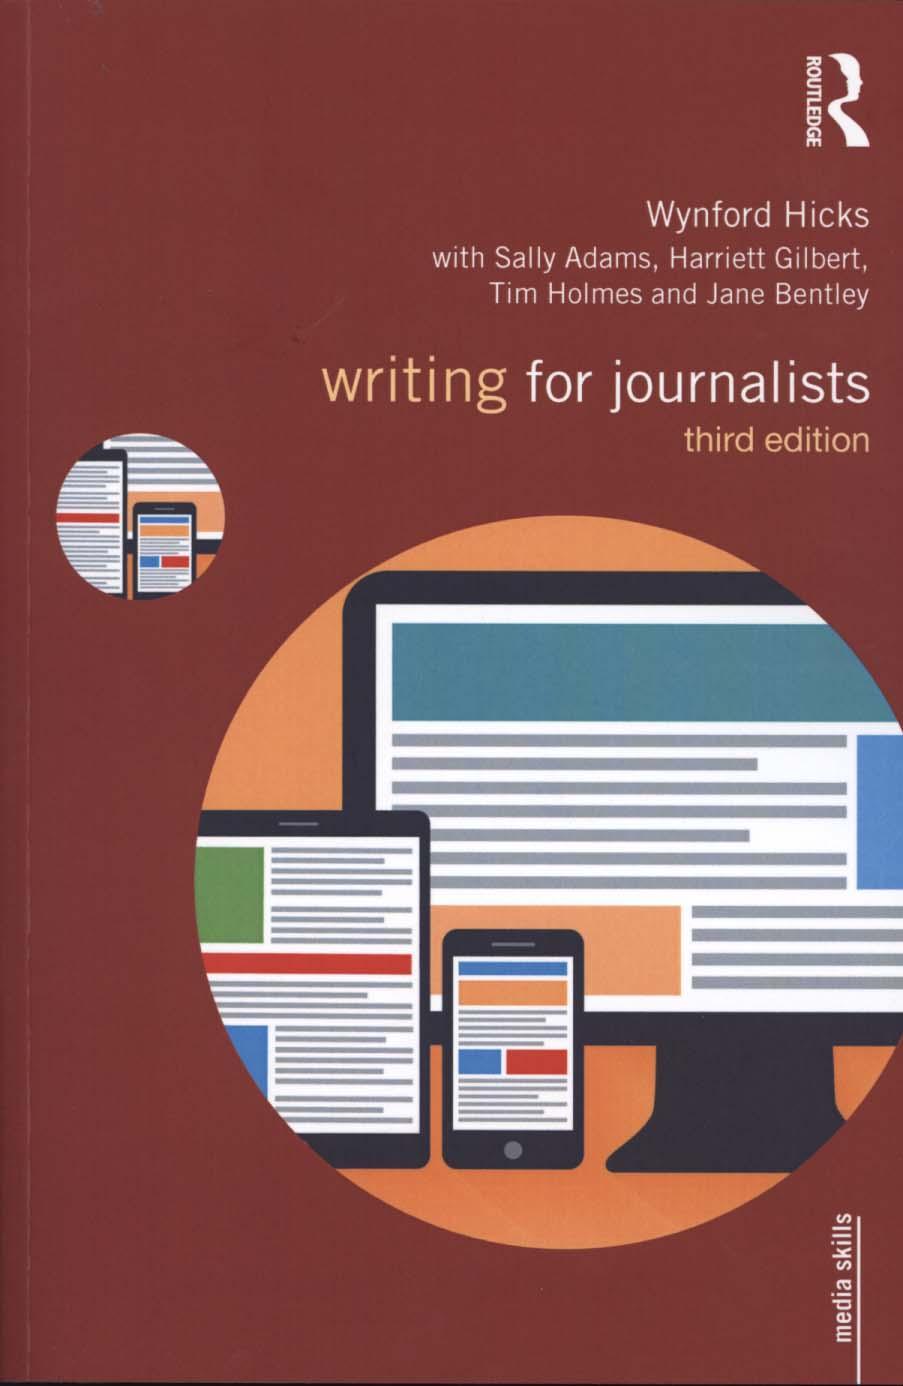 Writing for Journalists - Wynford Hicks